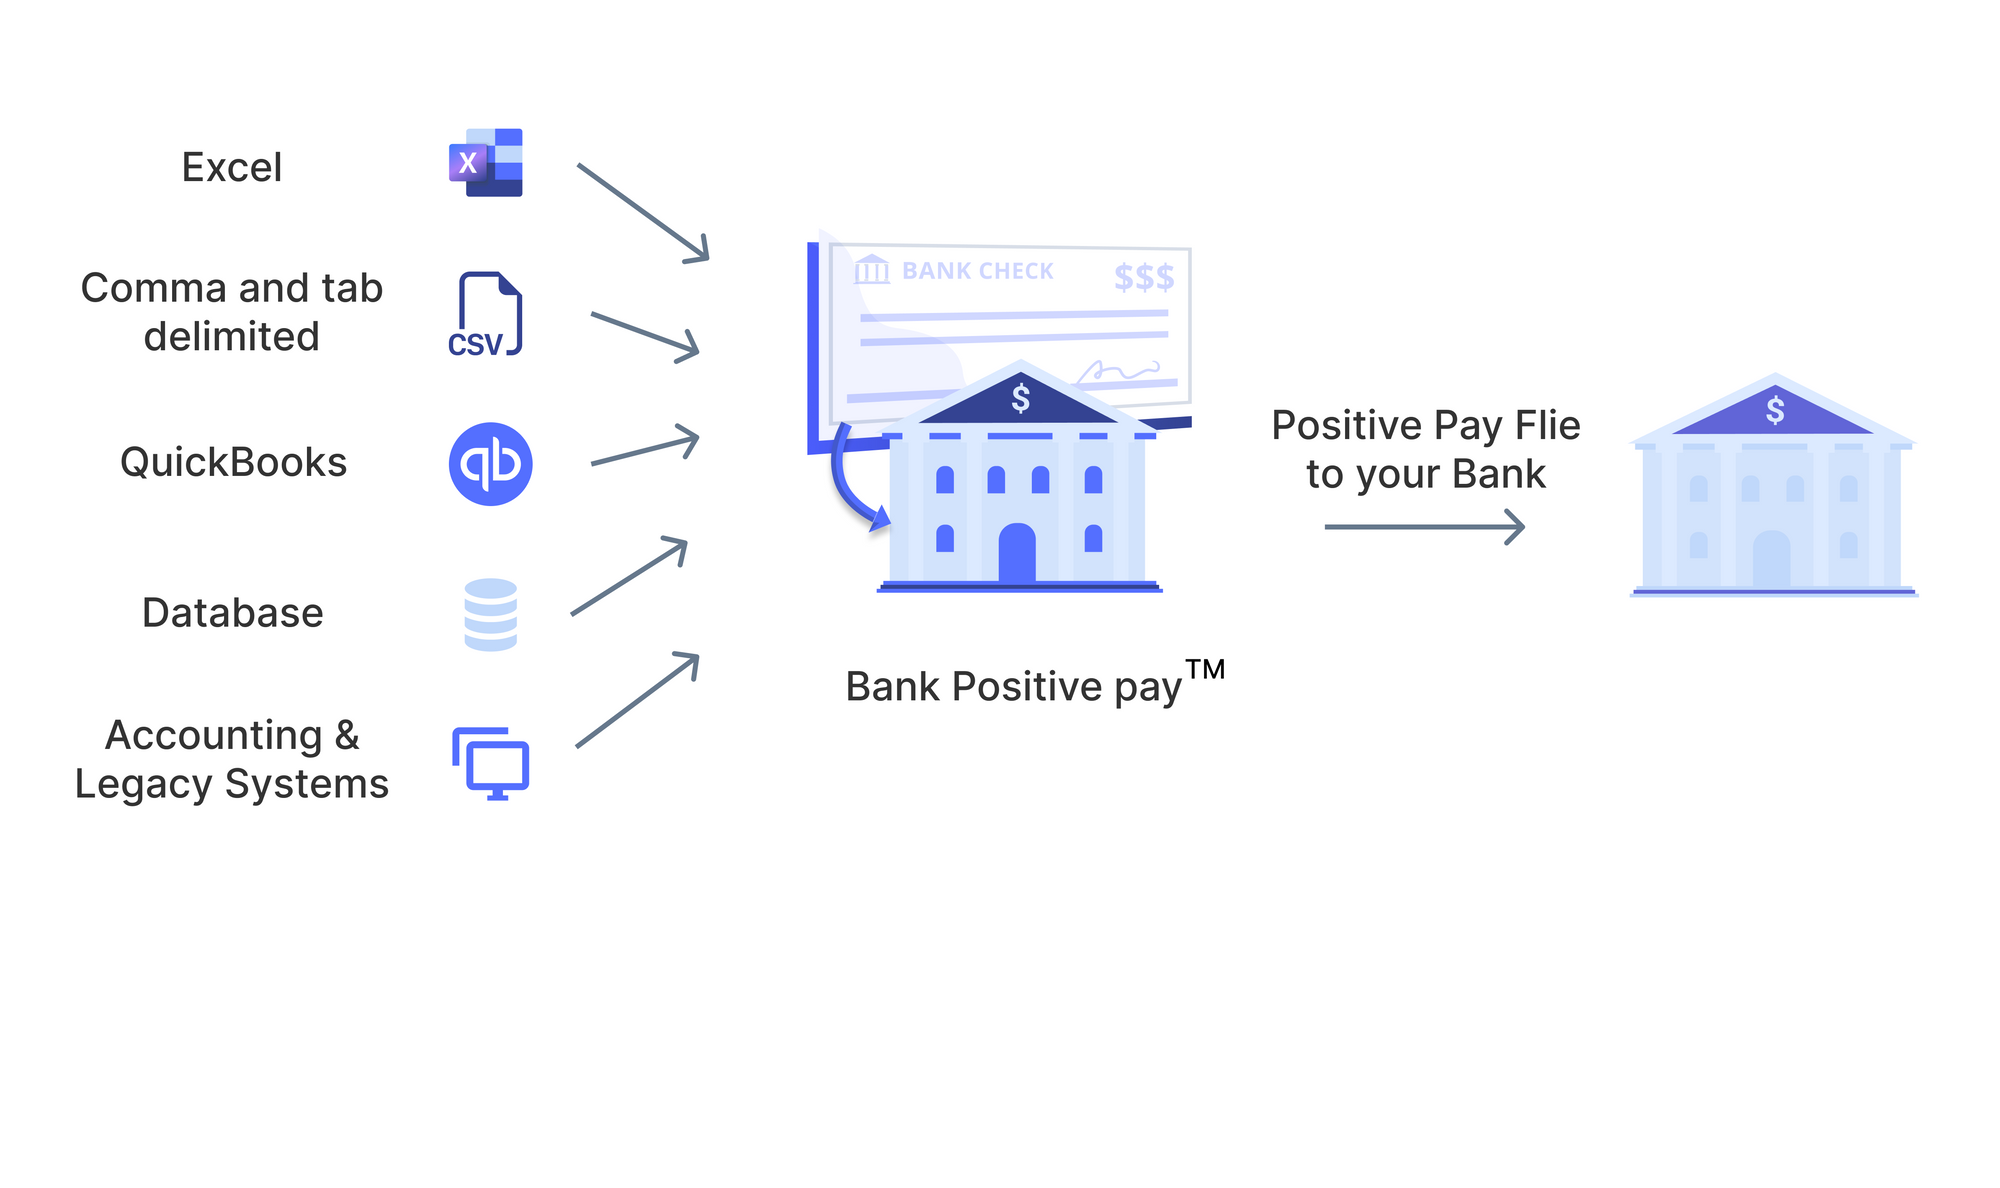 Positive Pay: What It Is, How It Works, vs. Reverse Positive Pay